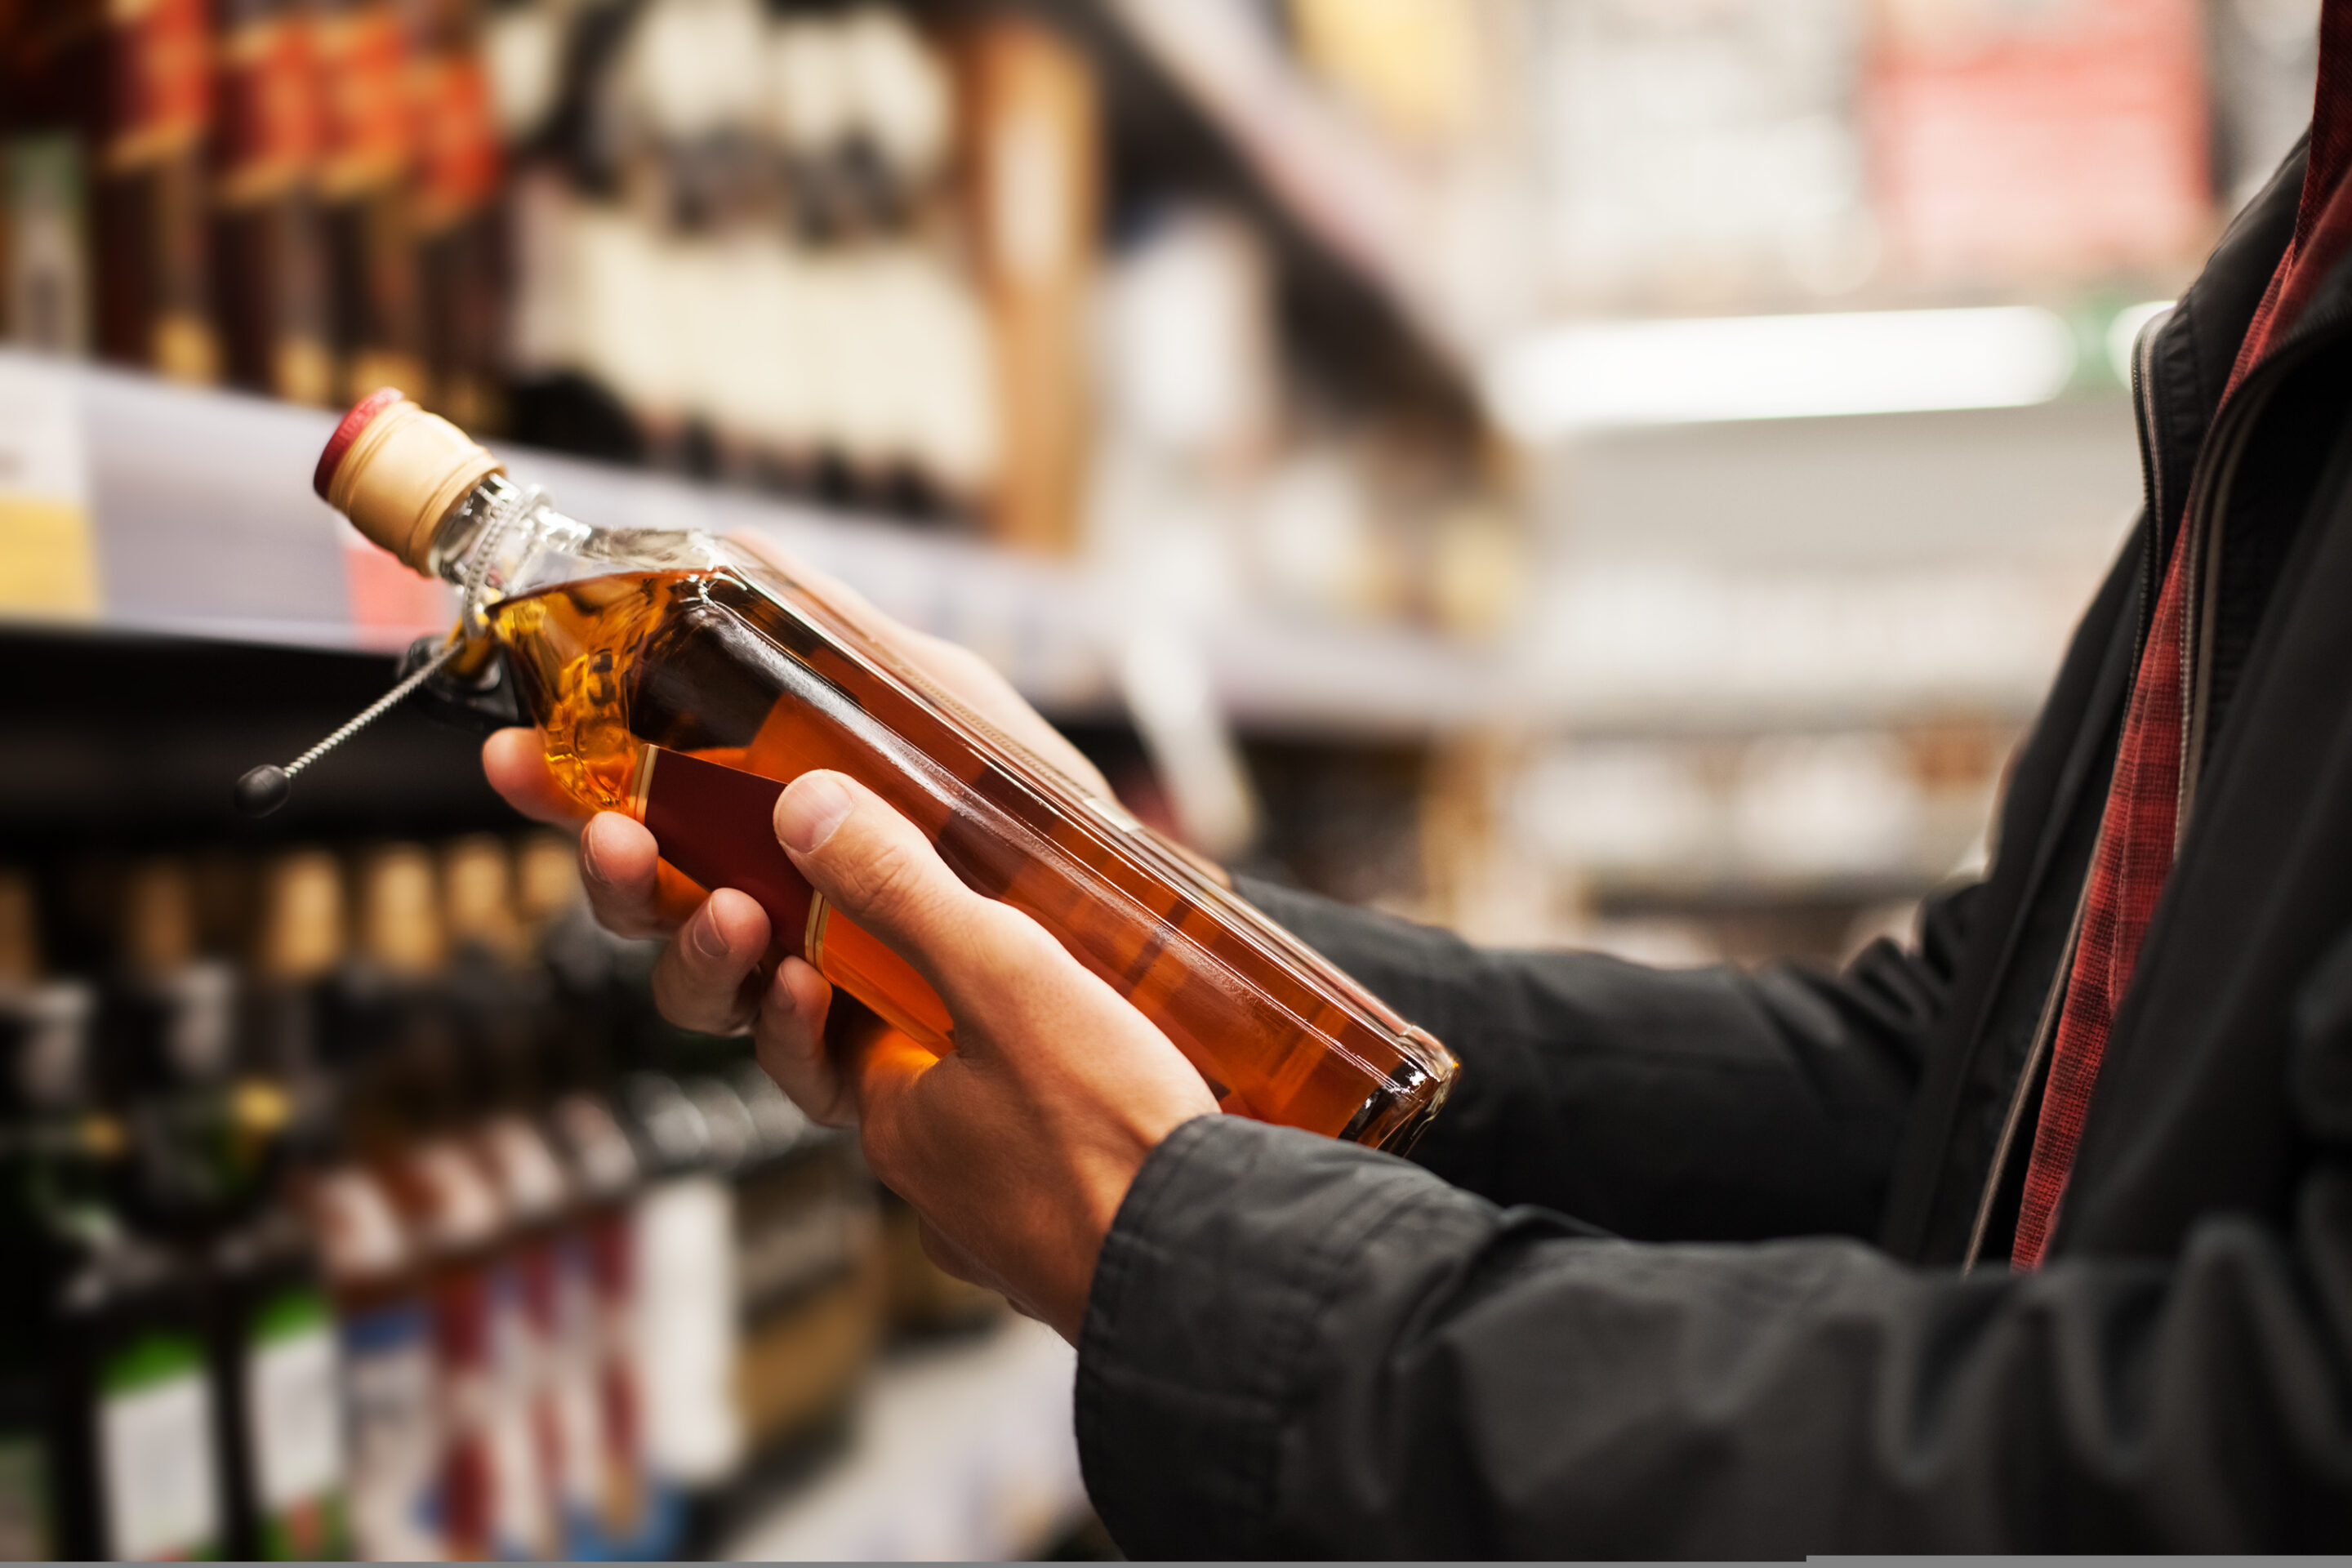 Getting the facts about alcohol – on the label